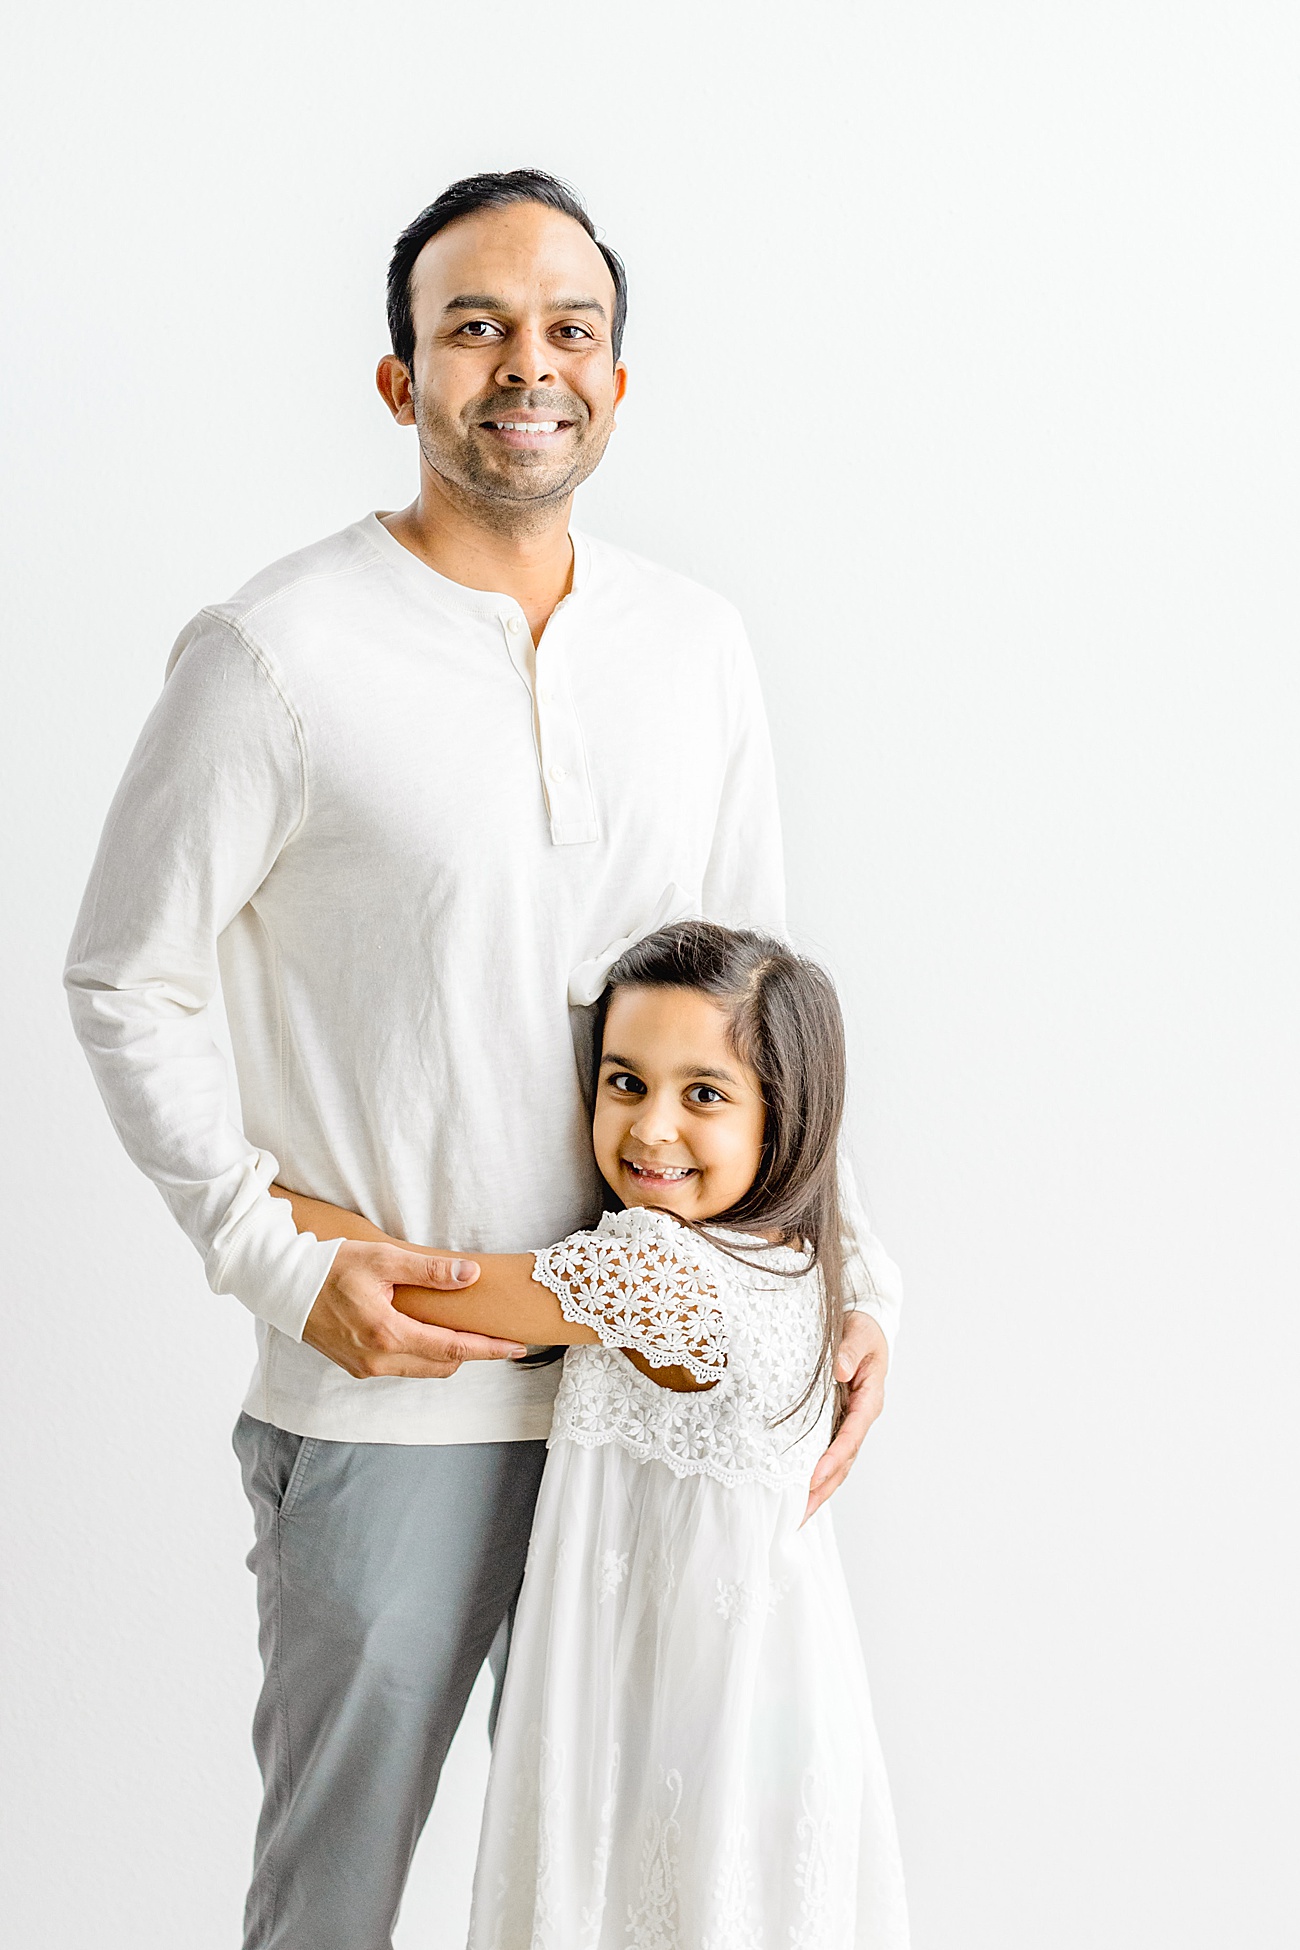 Dad smiling with daughter during session with Austin family photographer, Sana Ahmed Photography.